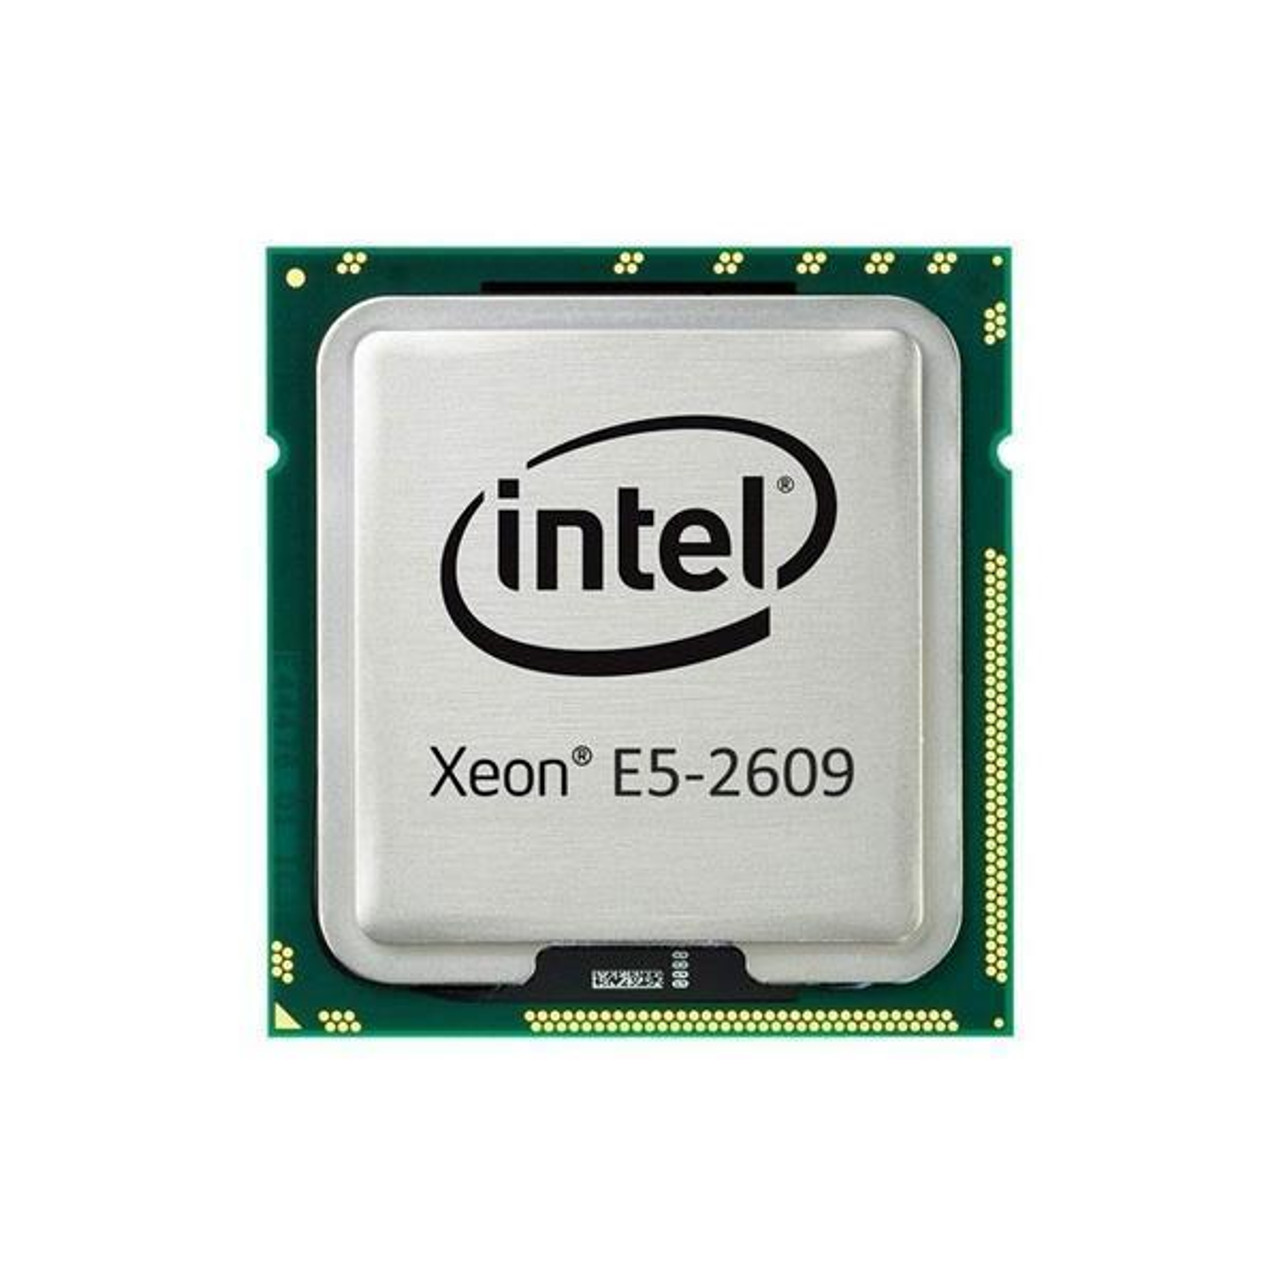 HPE 2.40GHz 6.40GT/s QPI 10MB L3 Cache Intel Xeon E5-2609 Quad Core Processor Upgrade for Synergy 480 Gen9